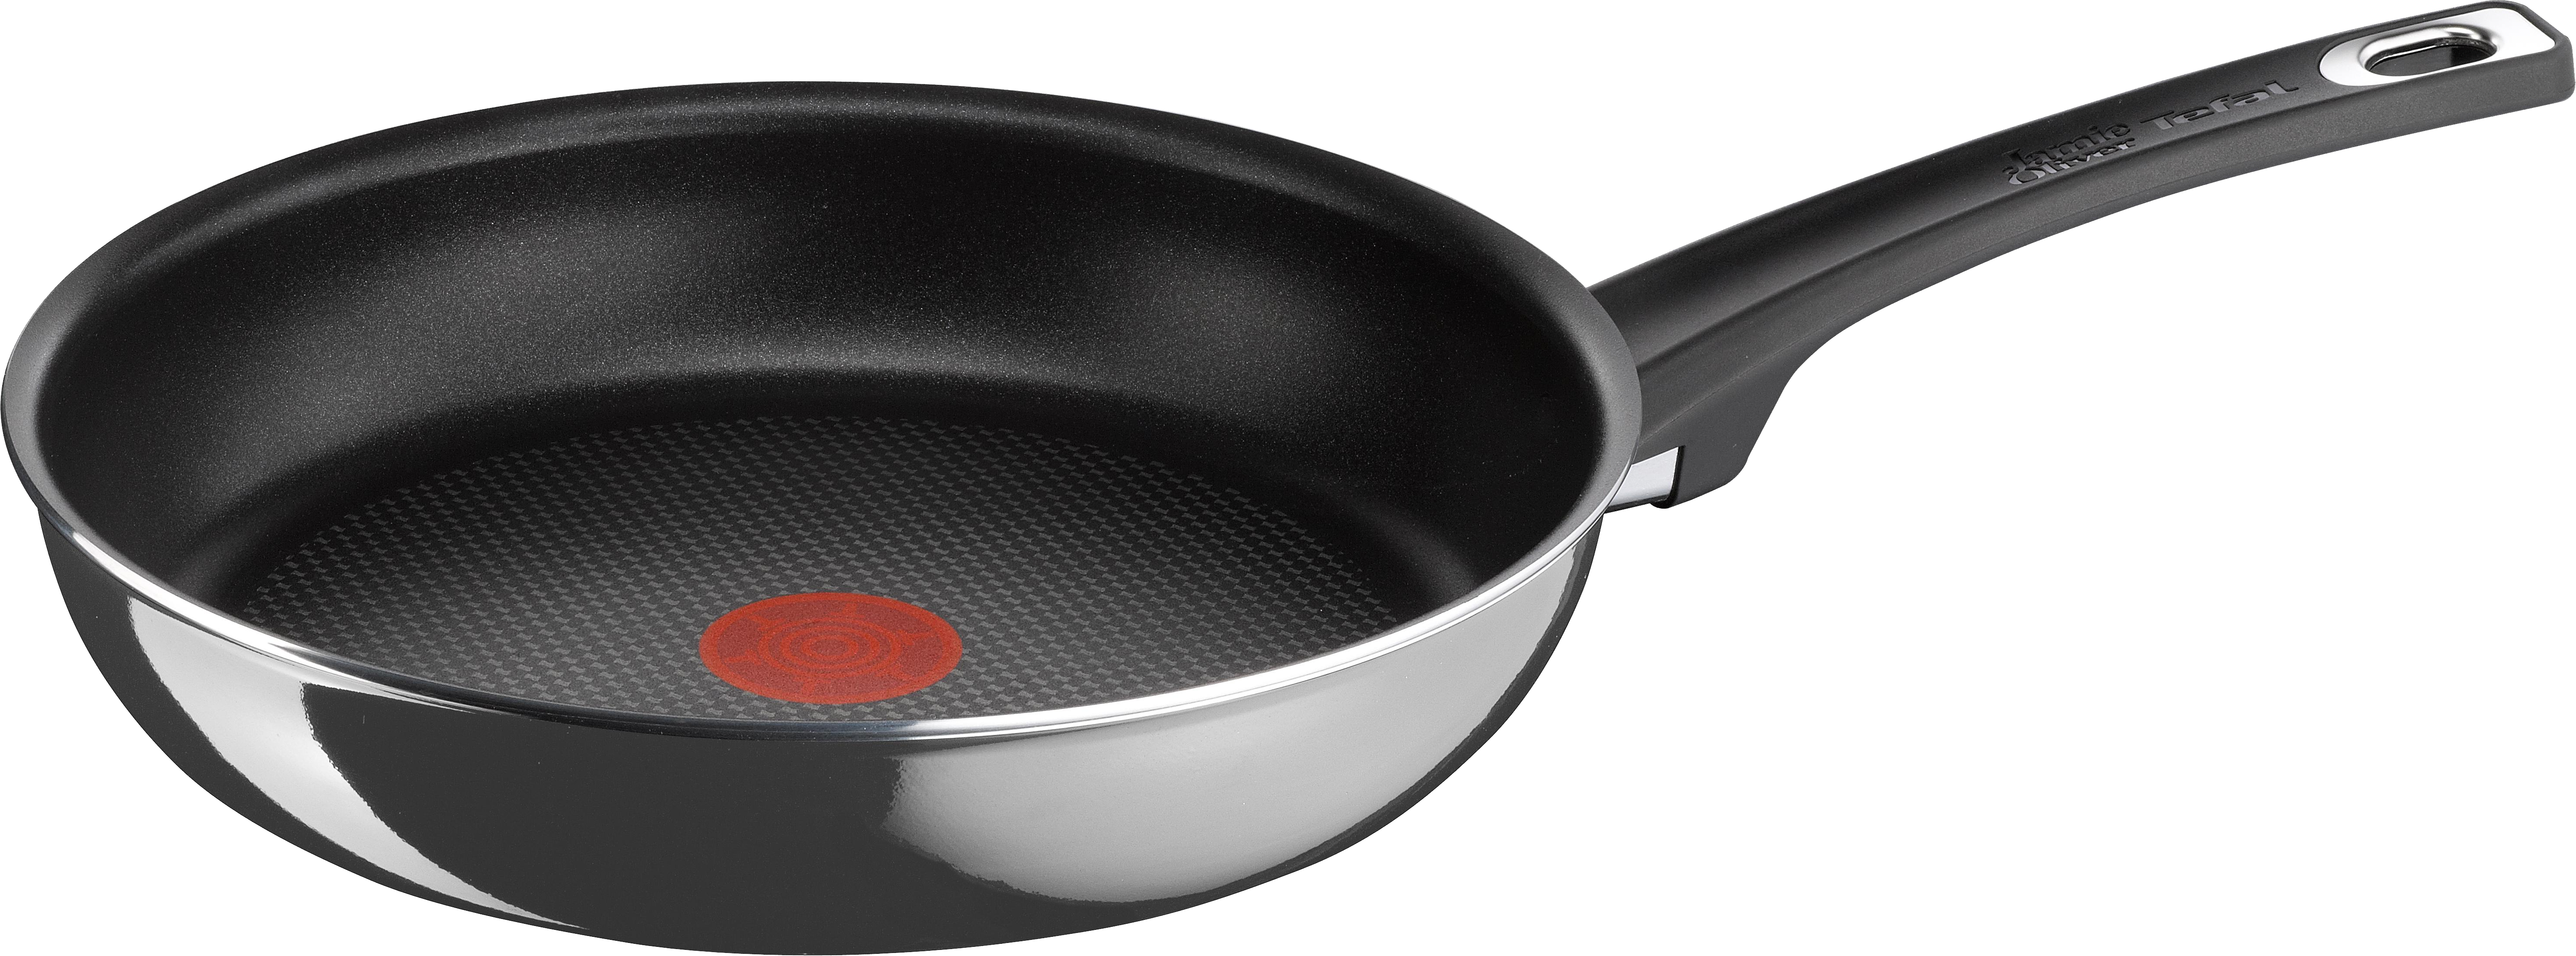 Fries clipart frypan. Frying pan png images